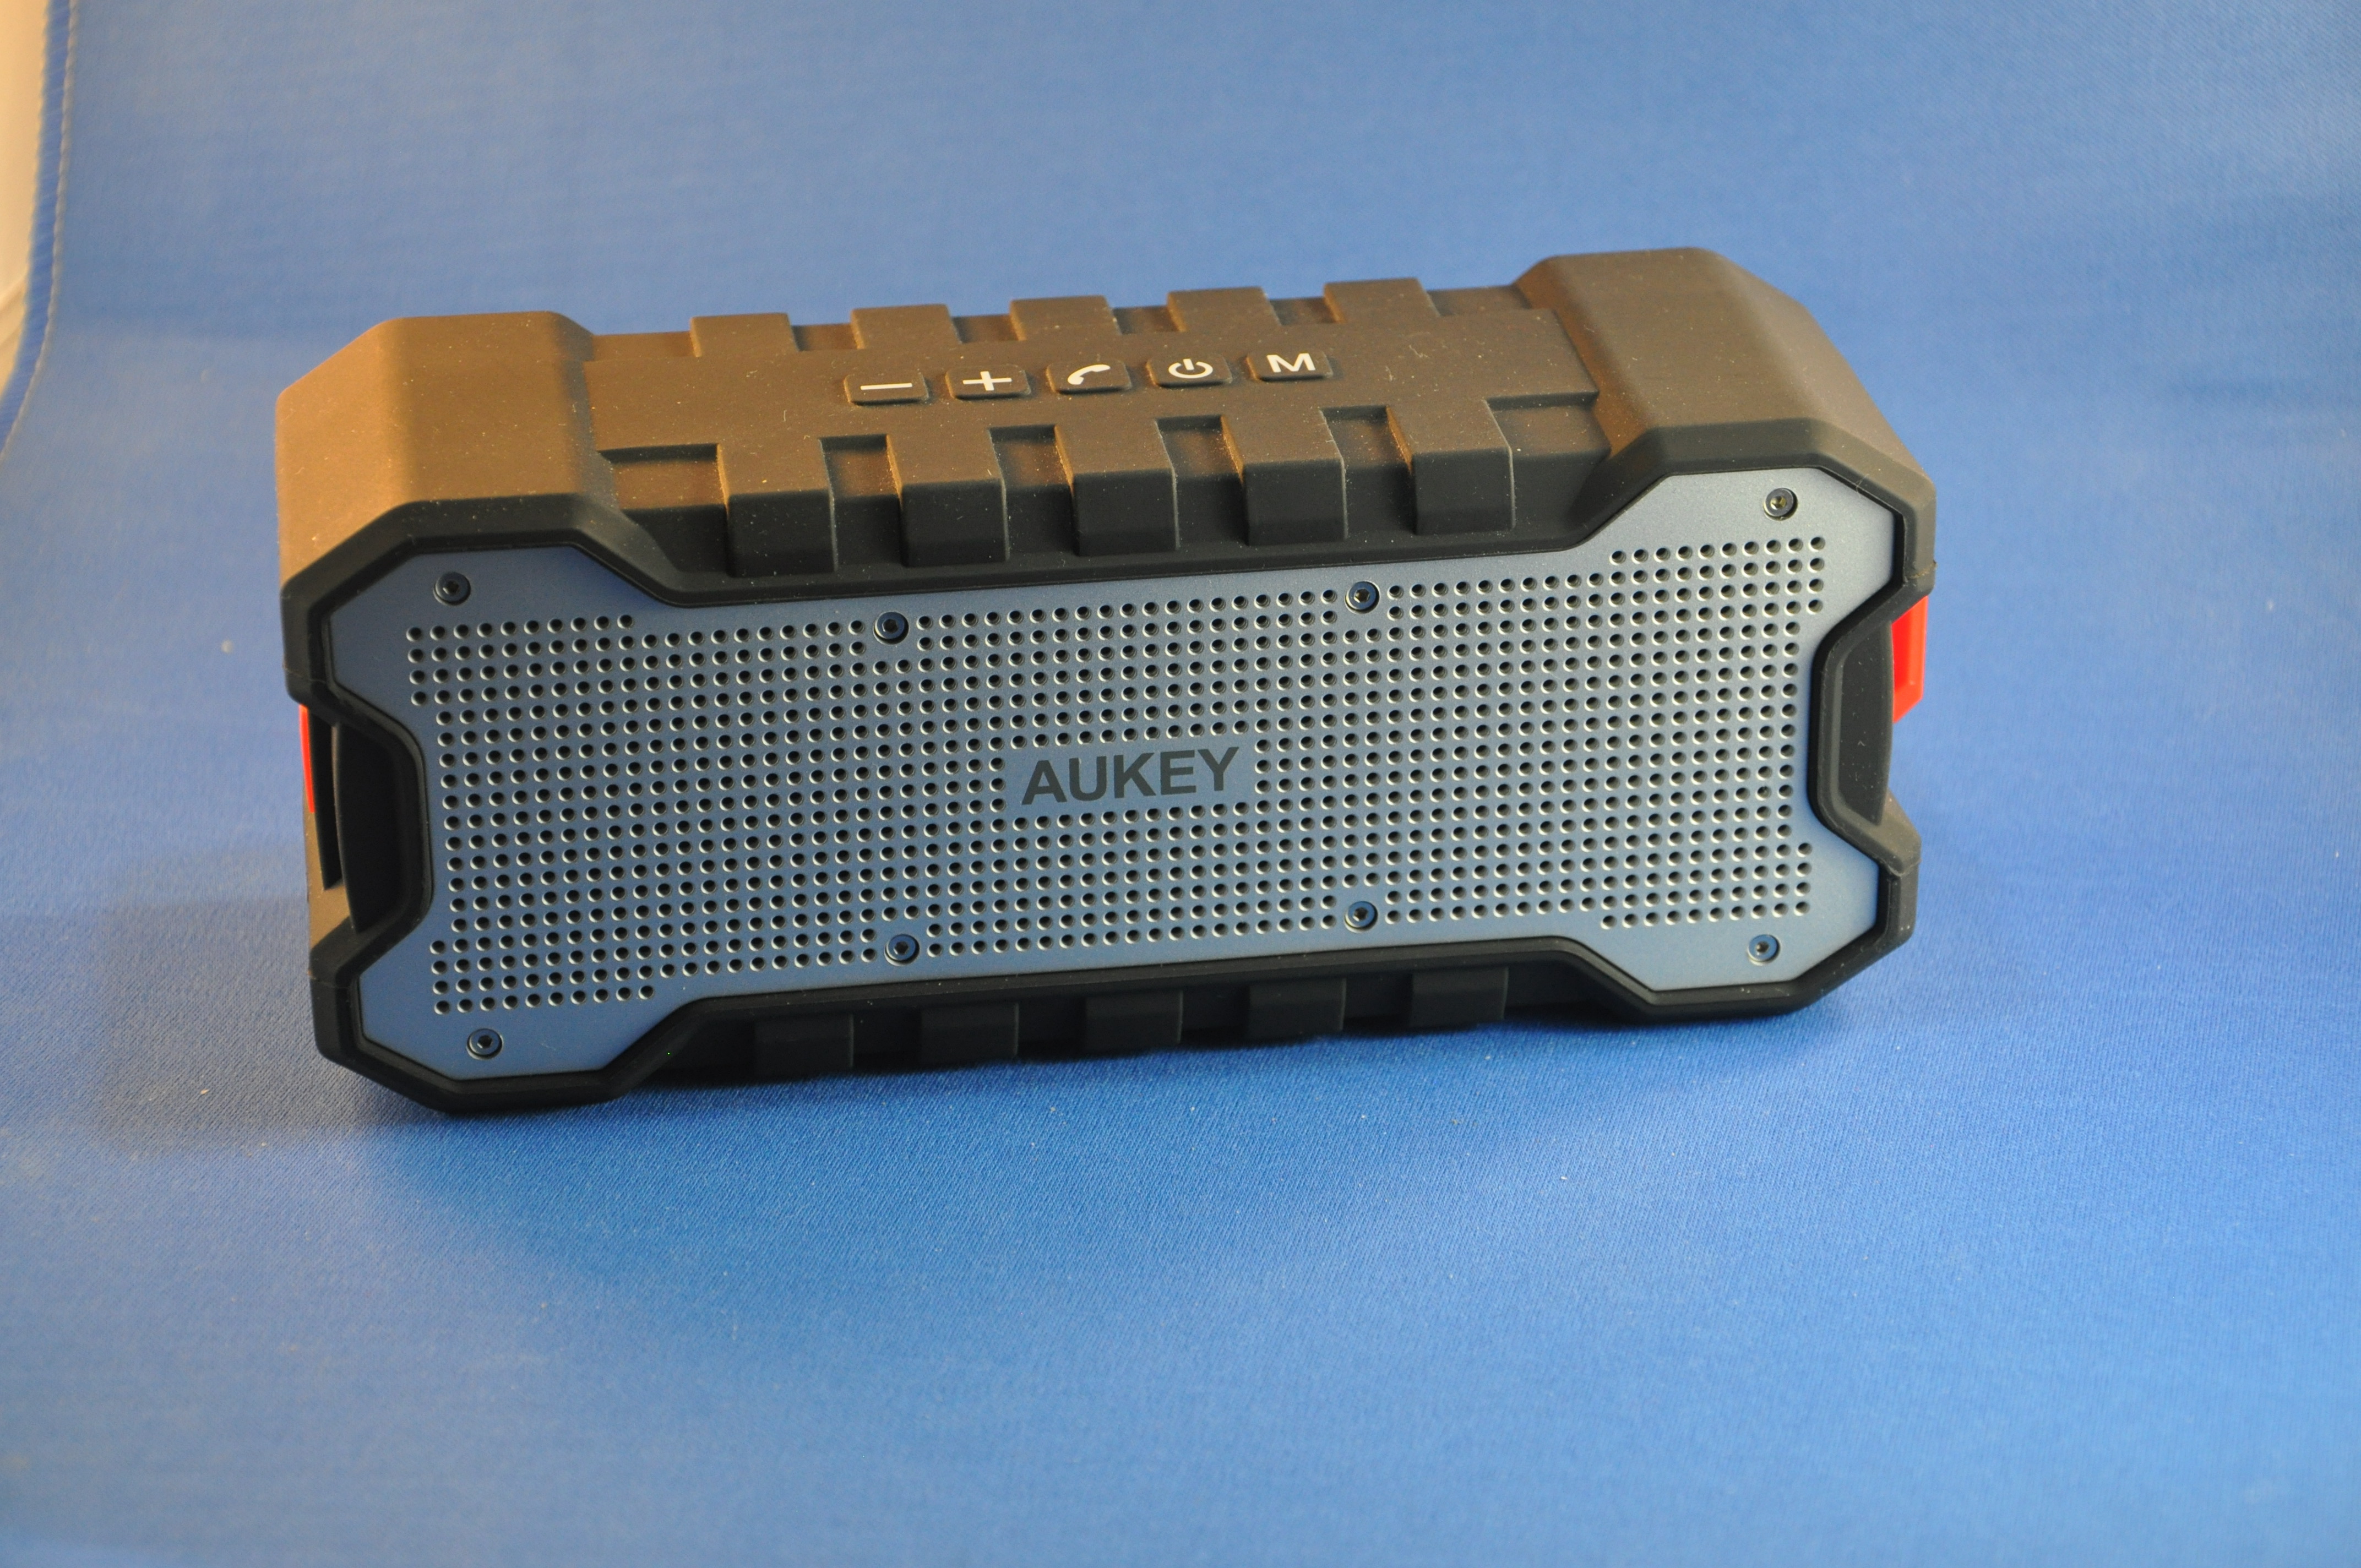 Aukey SK-M12 SoundTank Bluetooth outdoor speaker review - The Gadgeteer